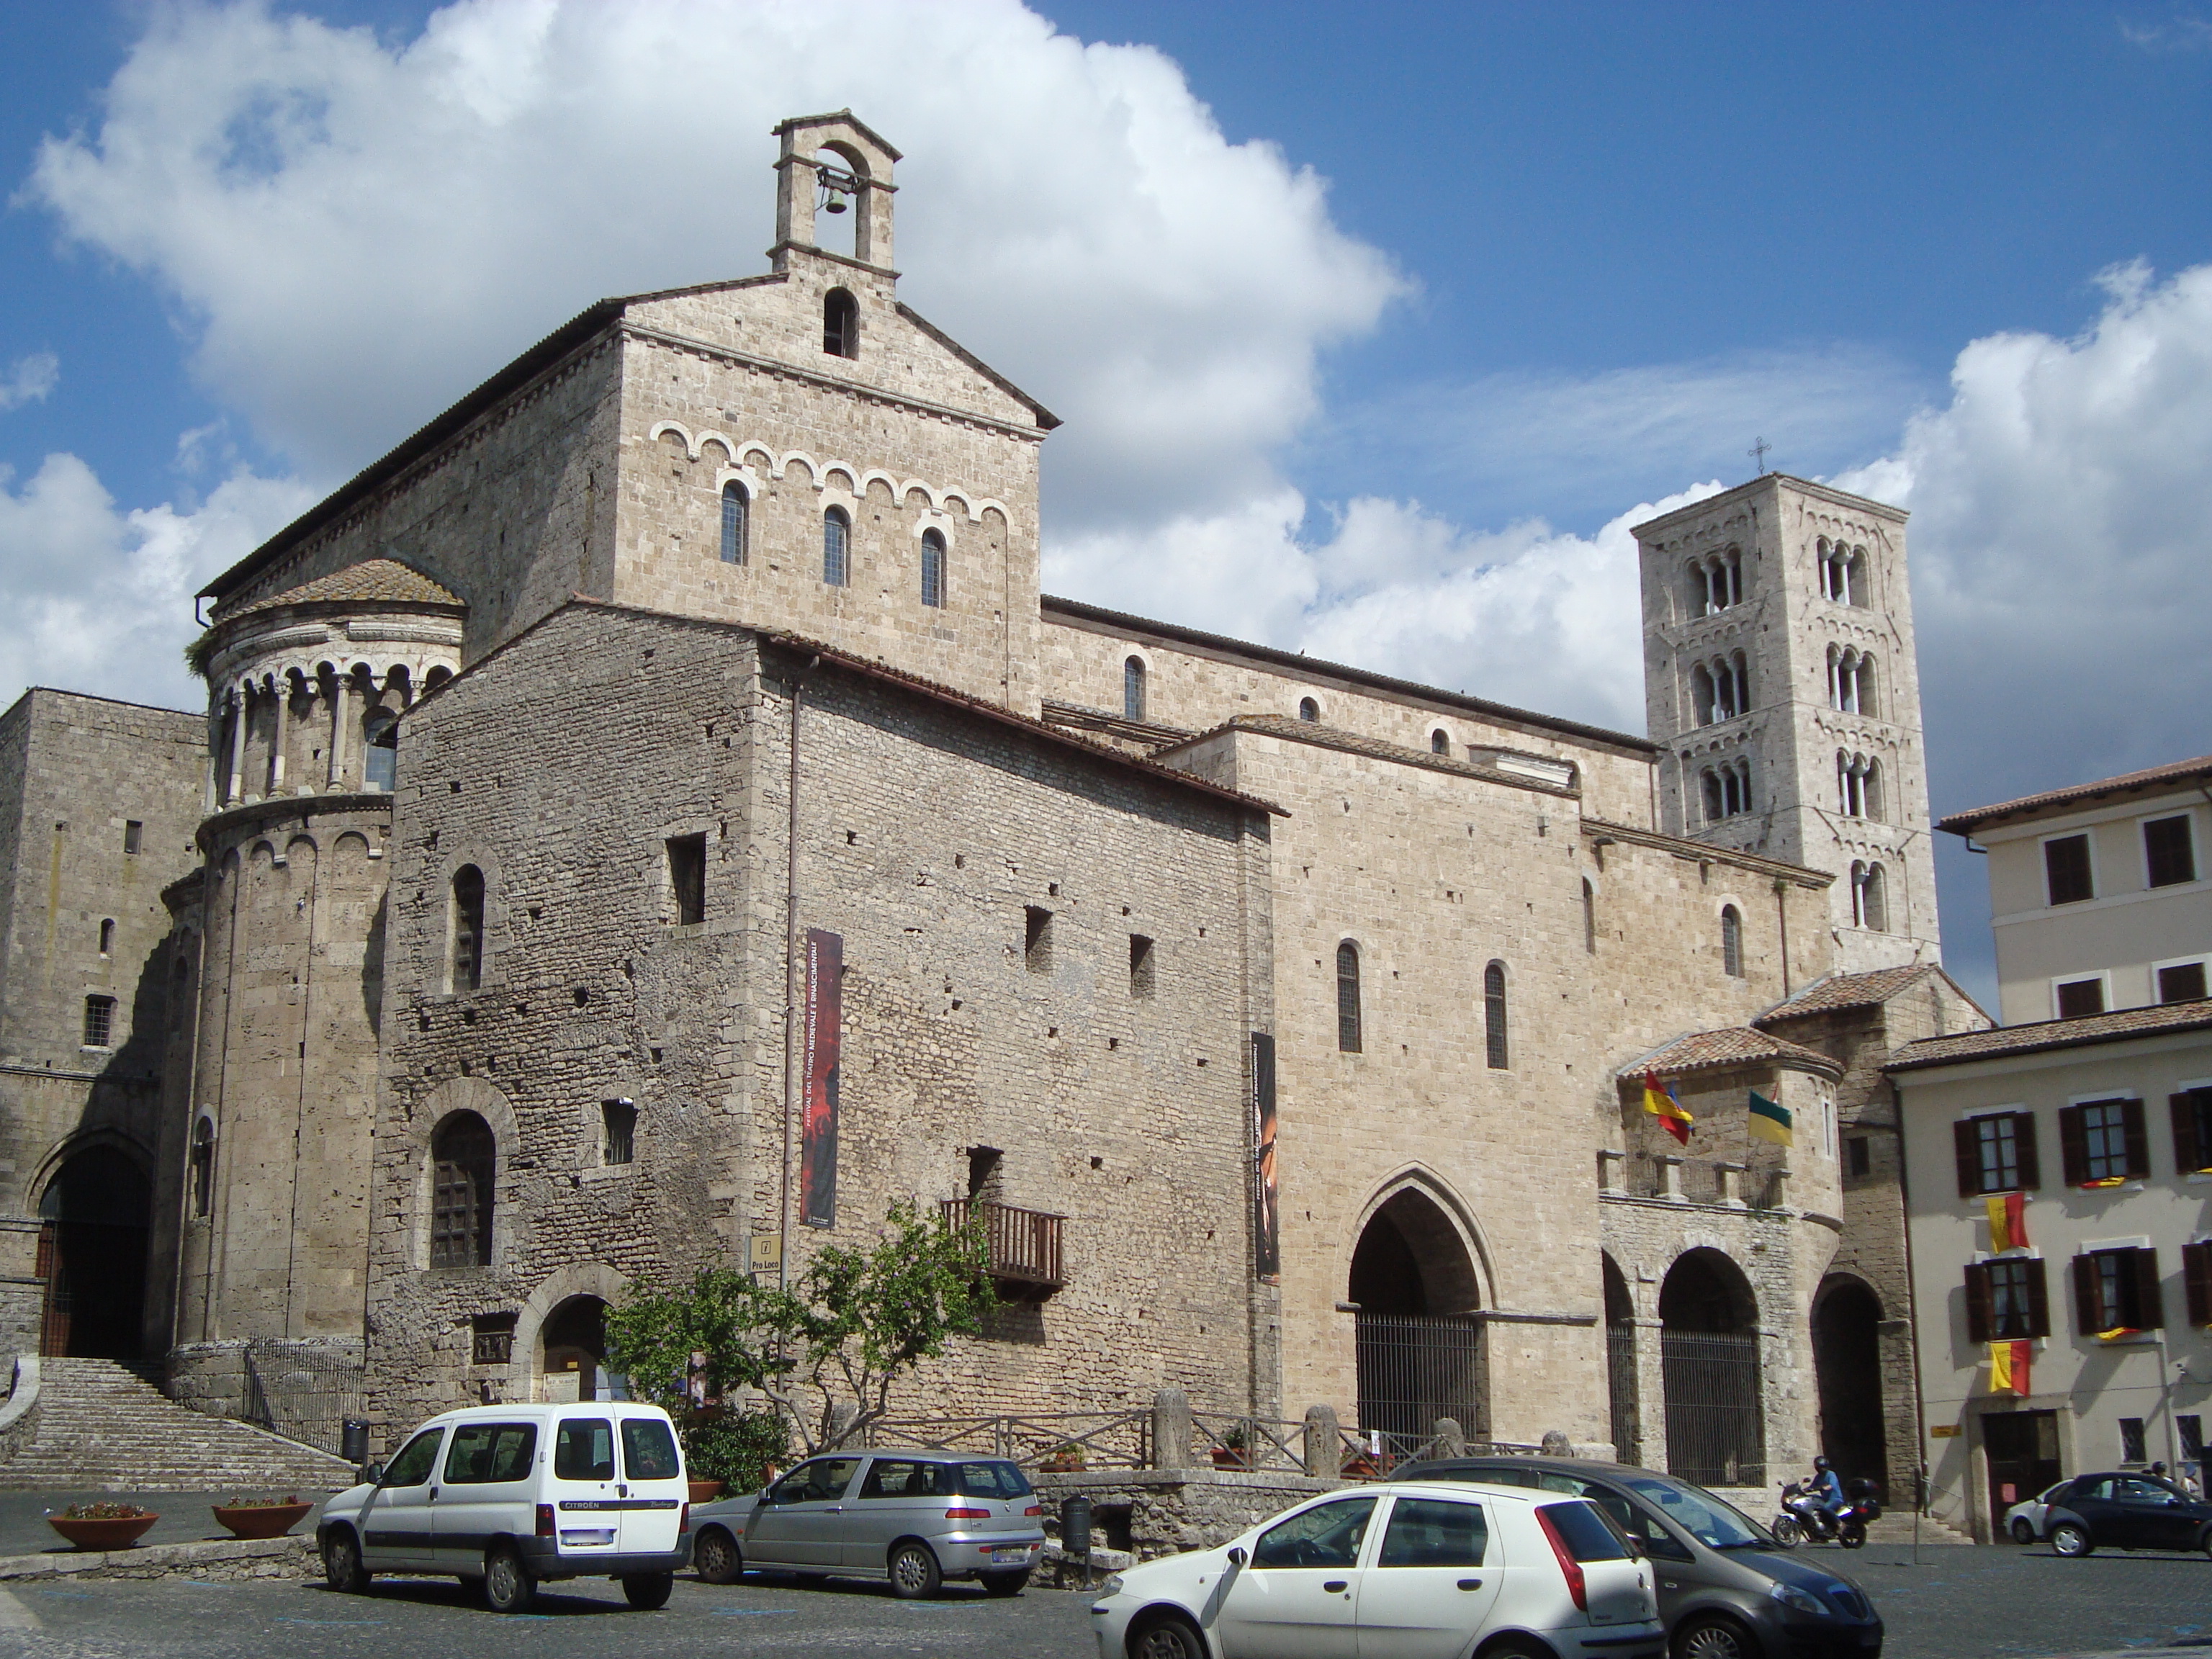 ANAGNI CATHEDRAL